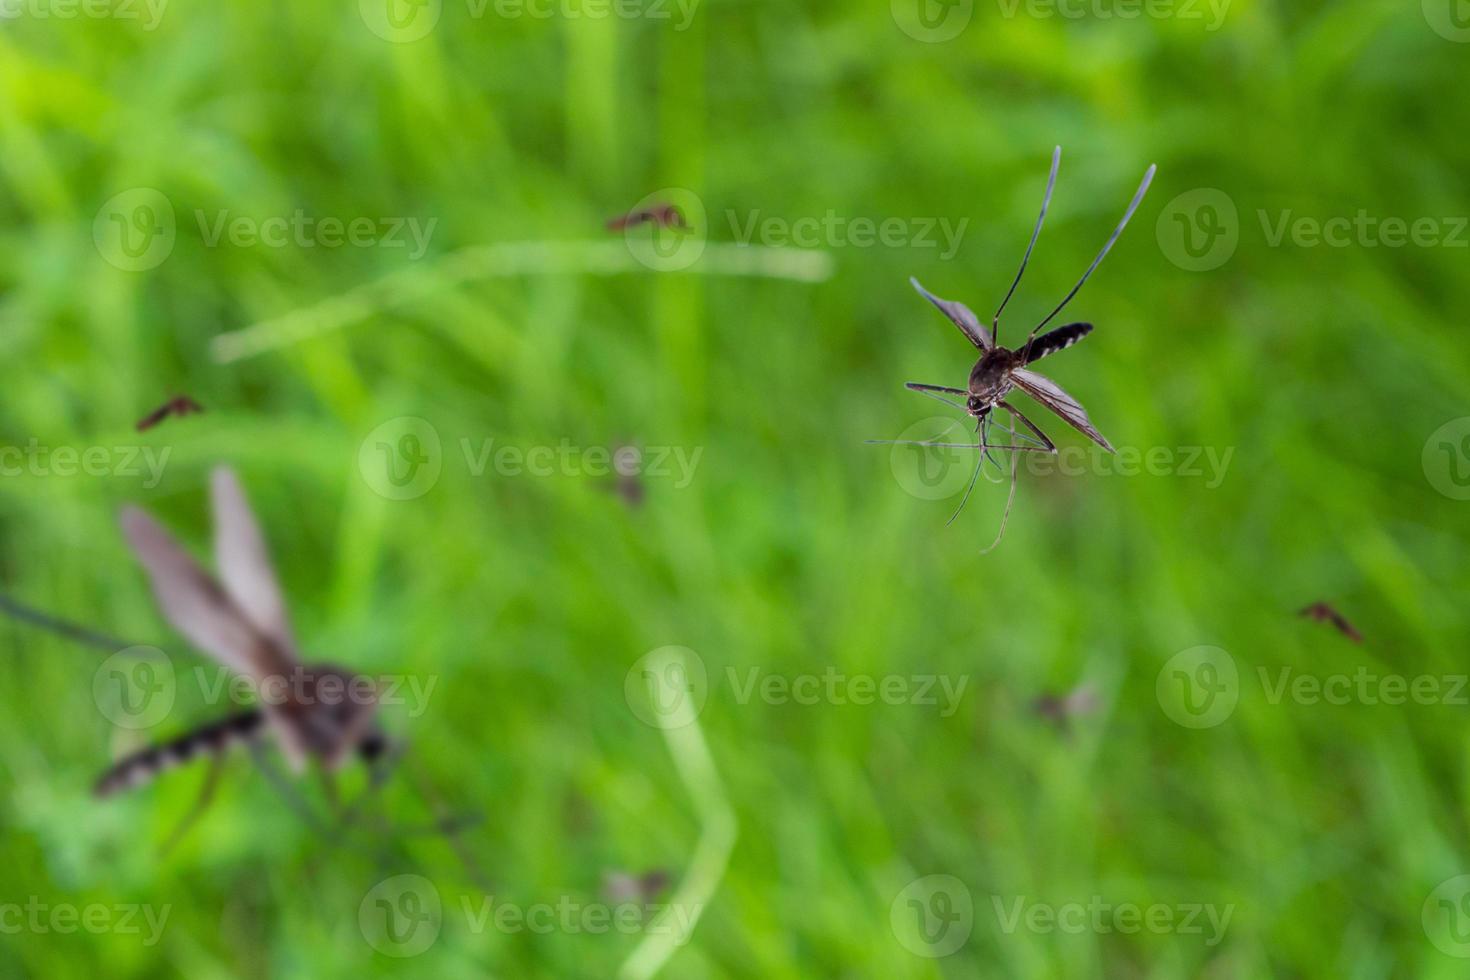 Many mosquitoes in green grass field photo